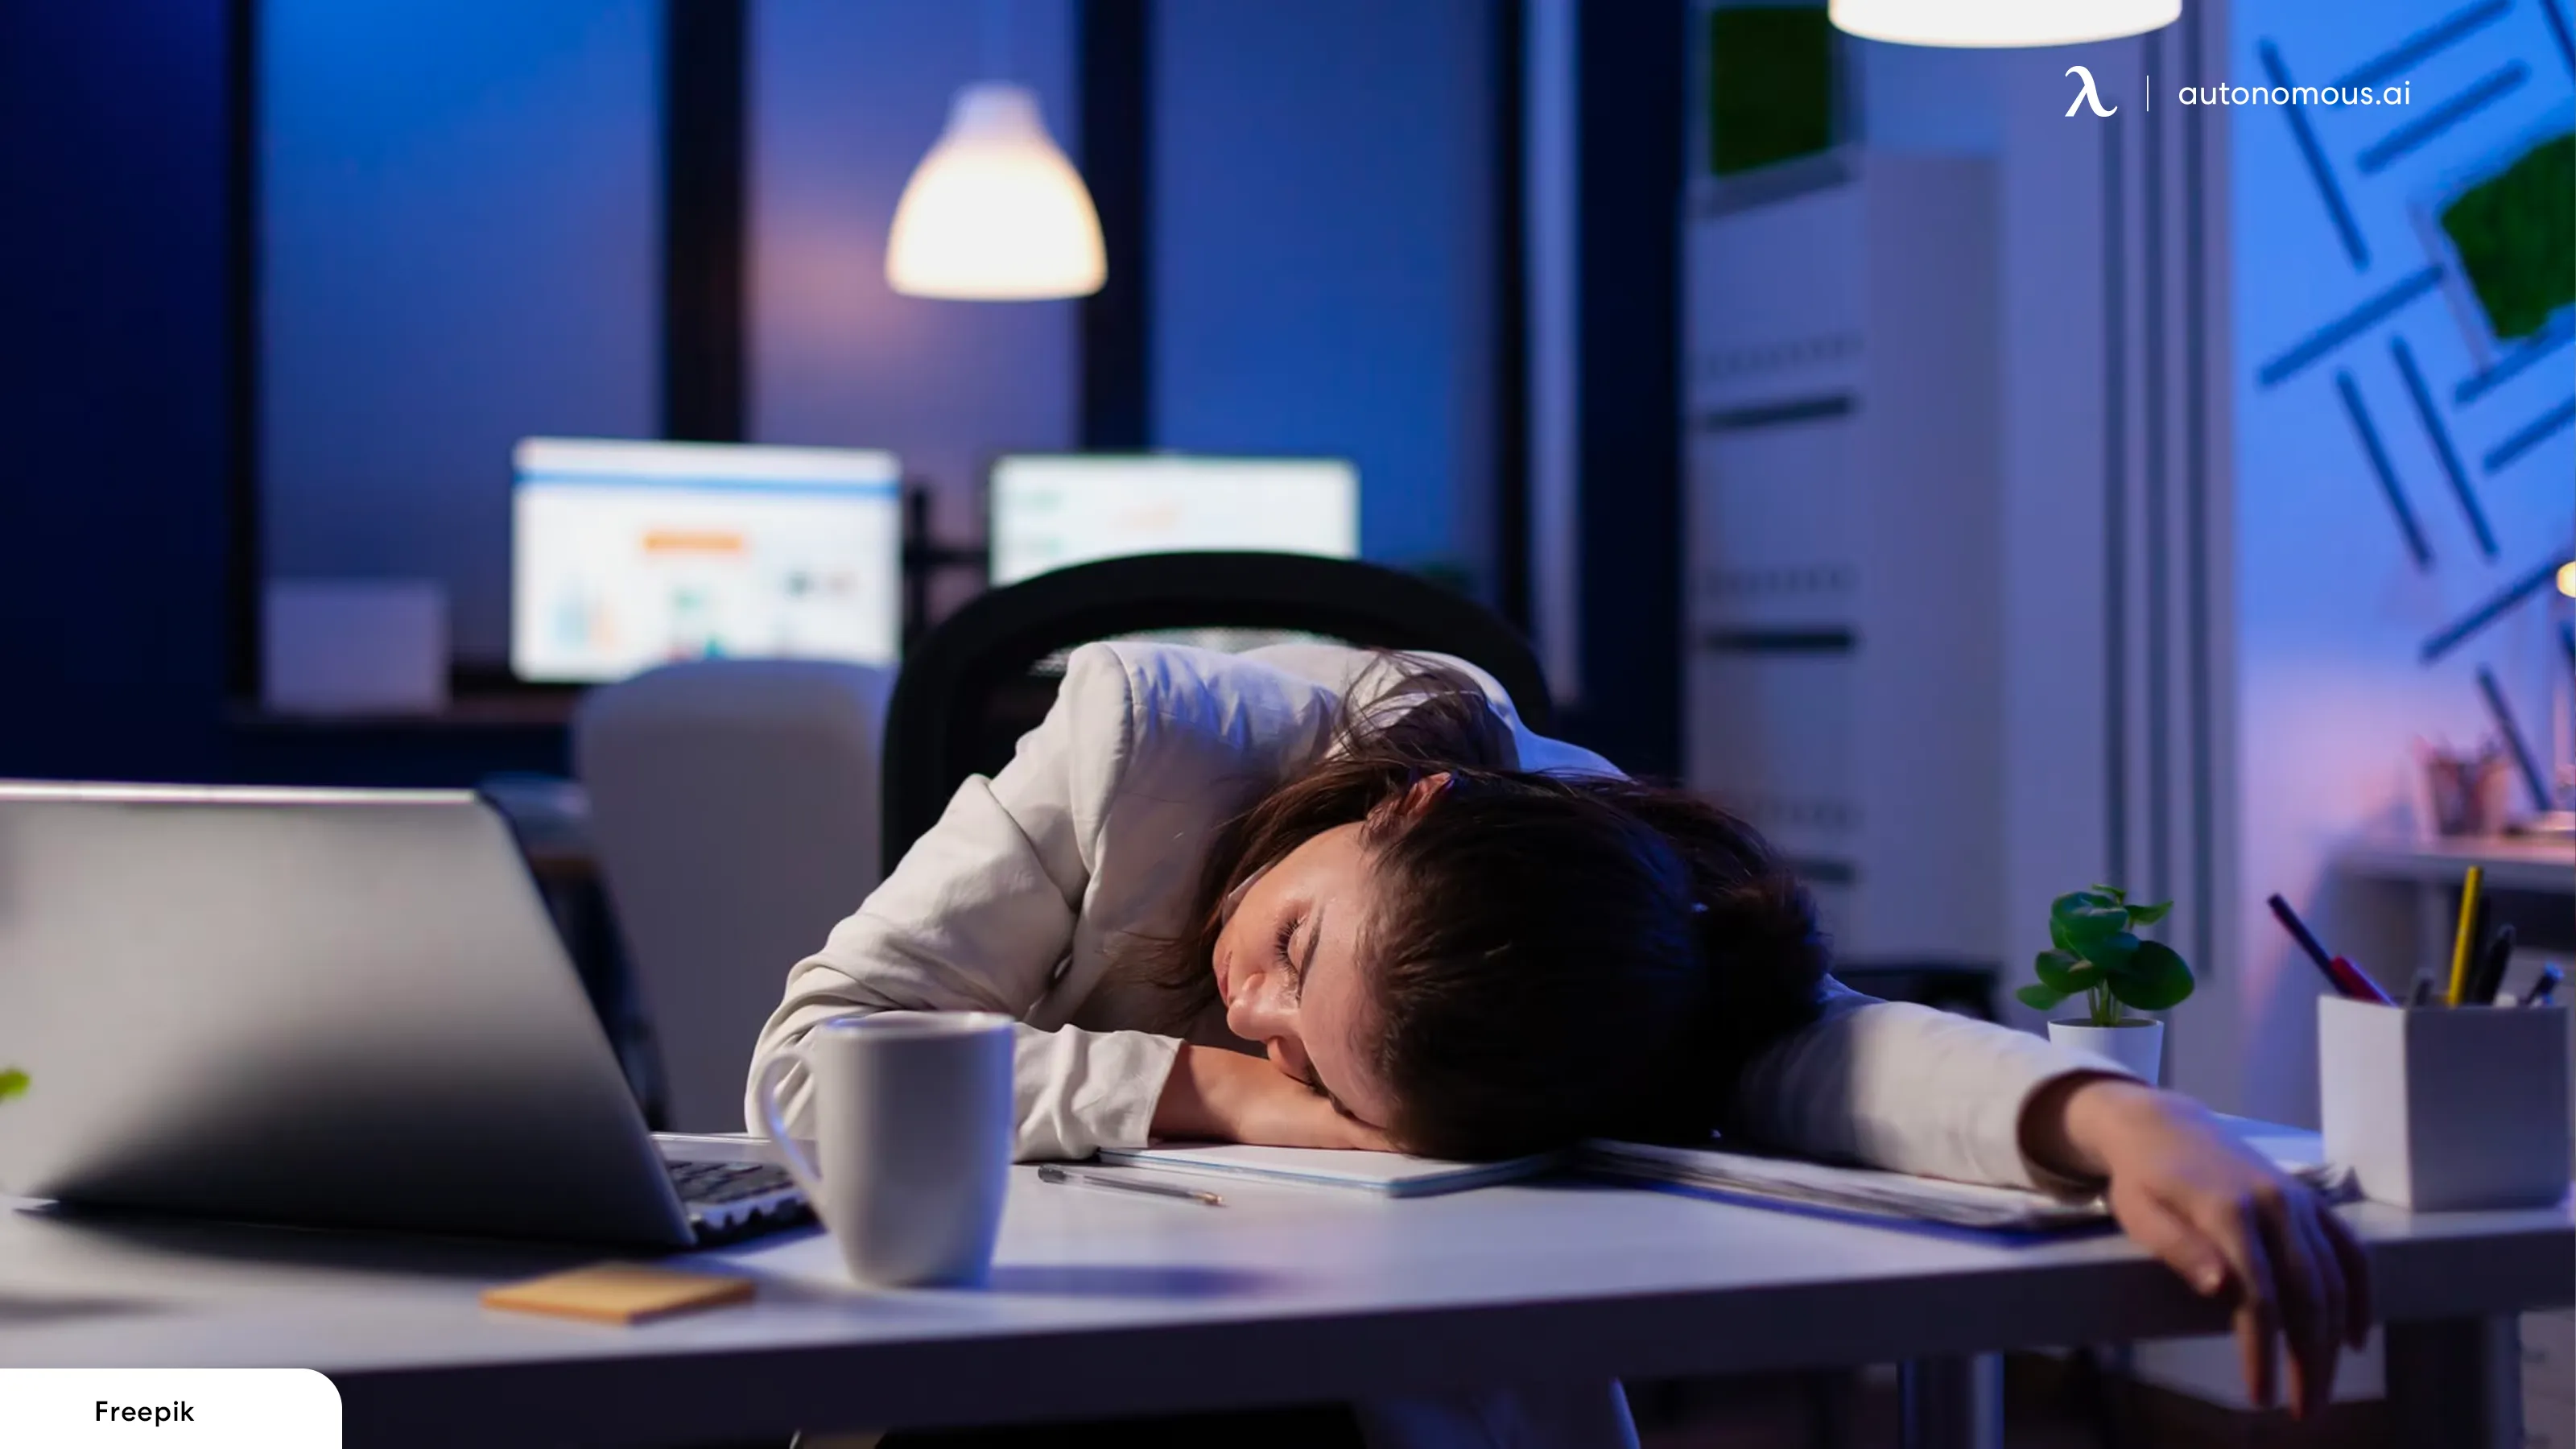 15 Tips to Beat the Afternoon Slump at Work and Finish Strong